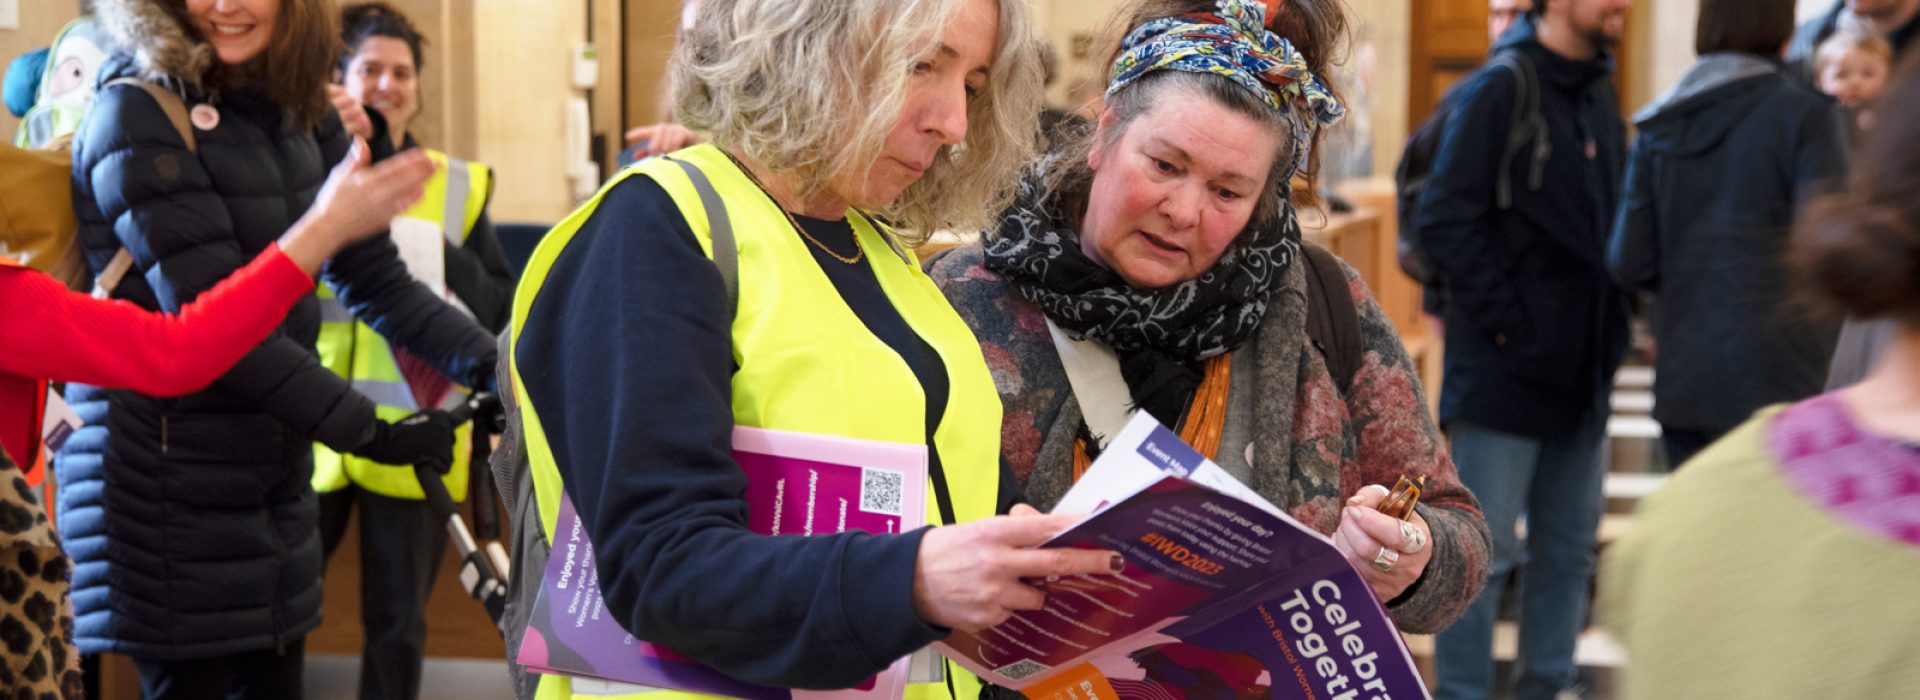 Two women standing in city hall and viewing a copy of International Women's Day programme